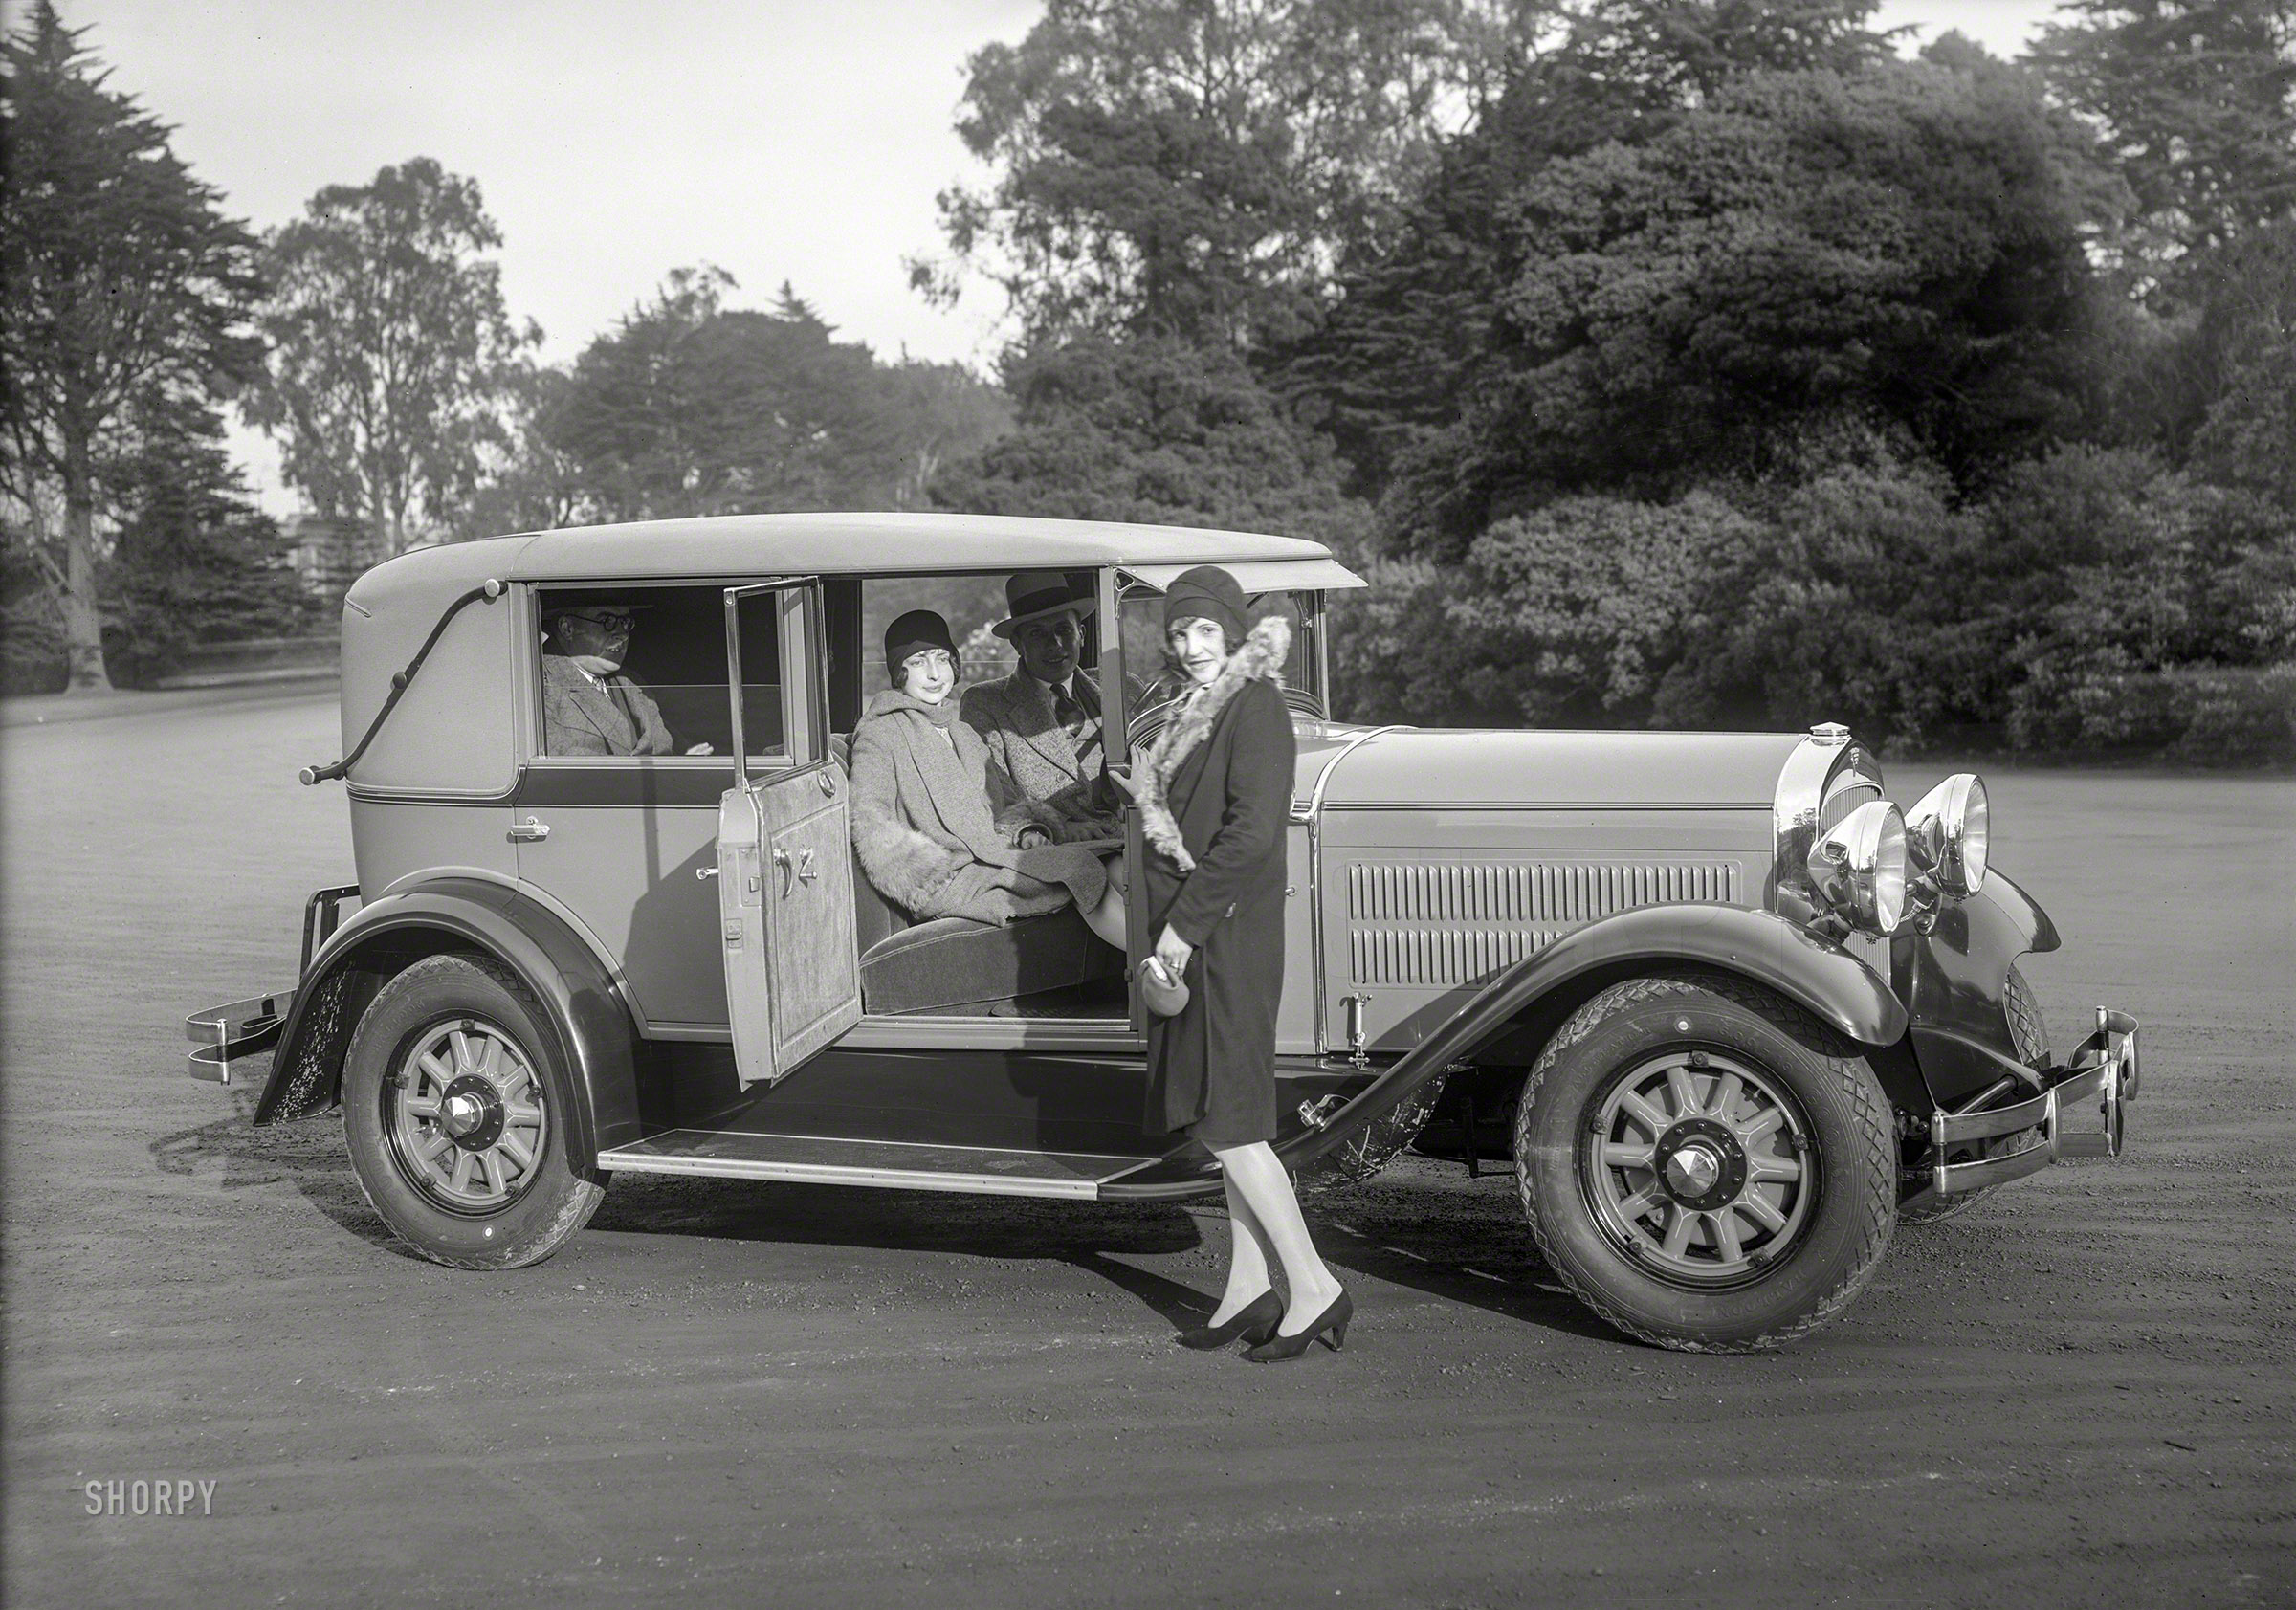 San Francisco, 1928. "Hudson Super Six Landau Sedan at Golden Gate Park." No. 1 with a bullet on the Shorpy Chart of Chic Chassis. 5x7 inch dry plate glass negative by Christopher Helin. View full size.